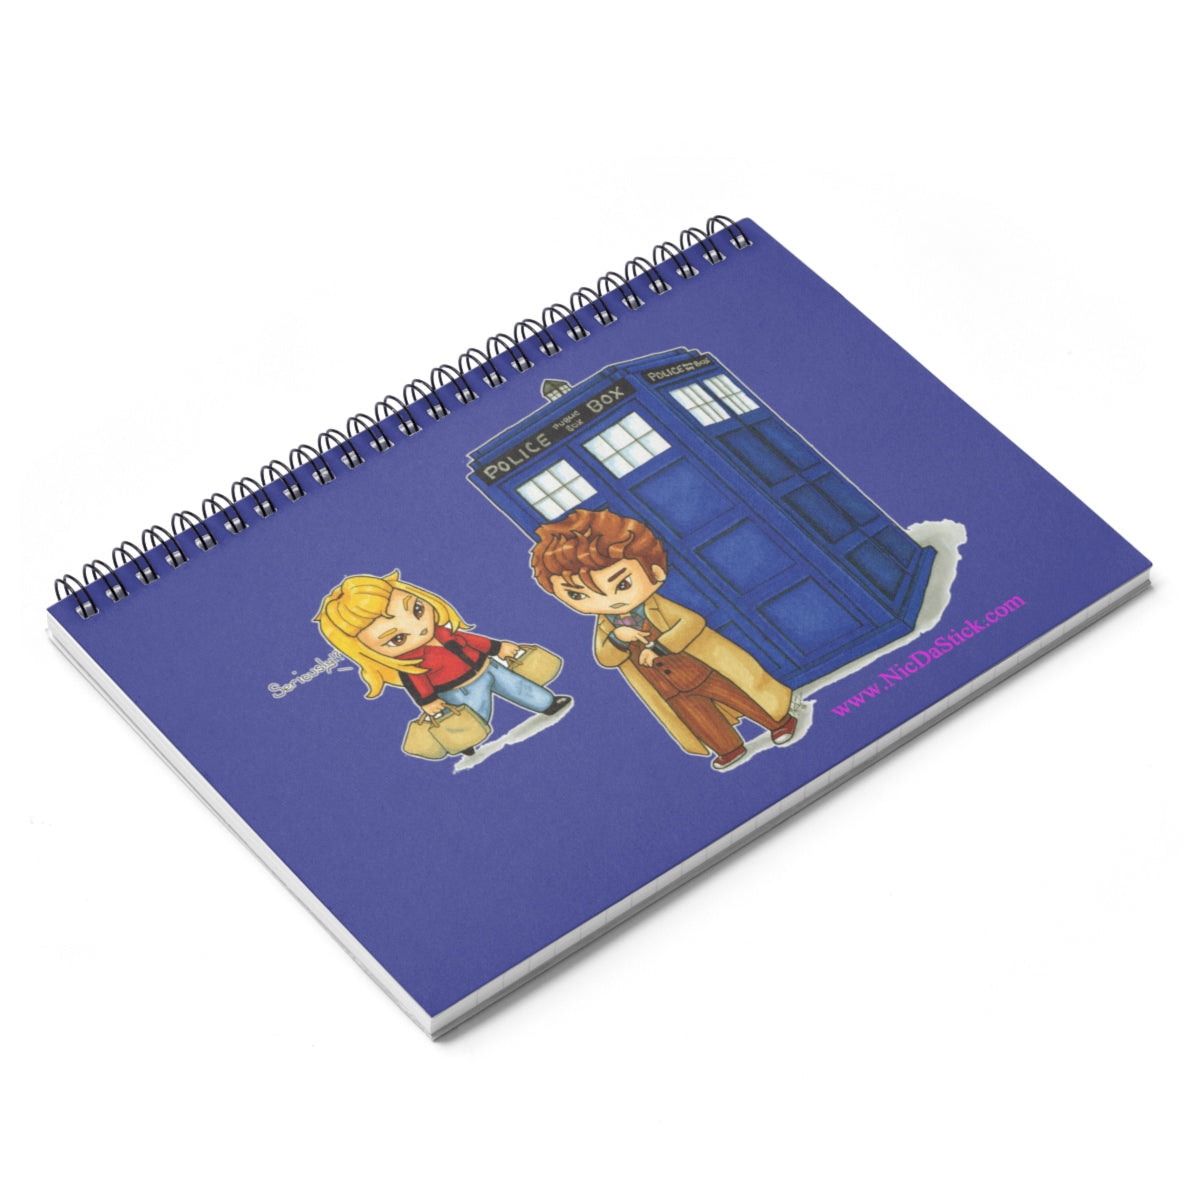 Late - Doctor Who Spiral Notebook - Ruled Line,Paper products - Nic Da Stick Creations